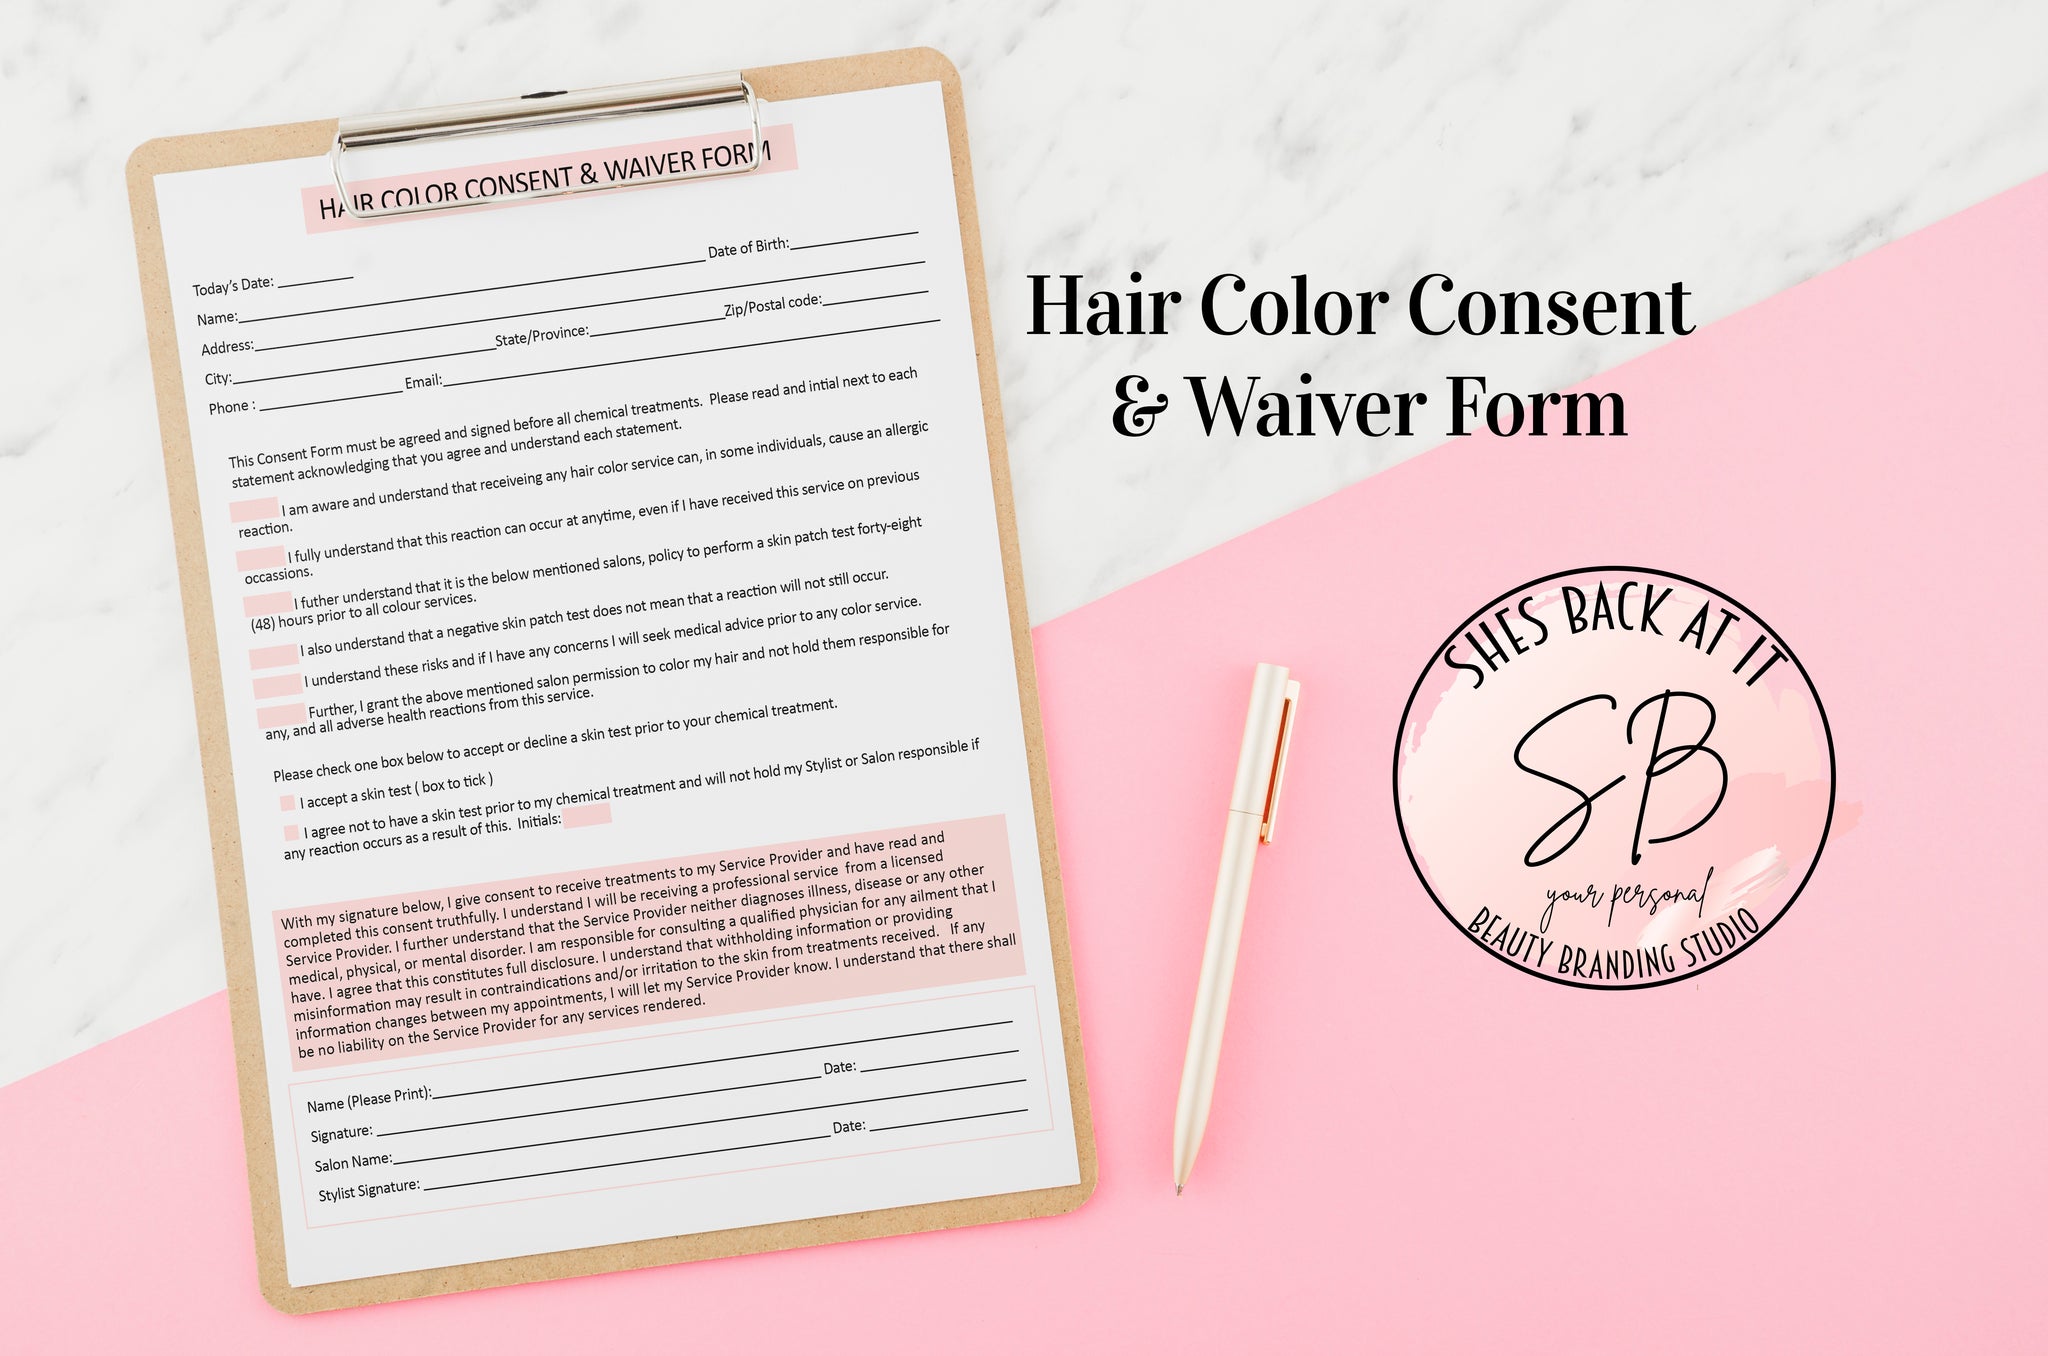 Hair Color Consent Form